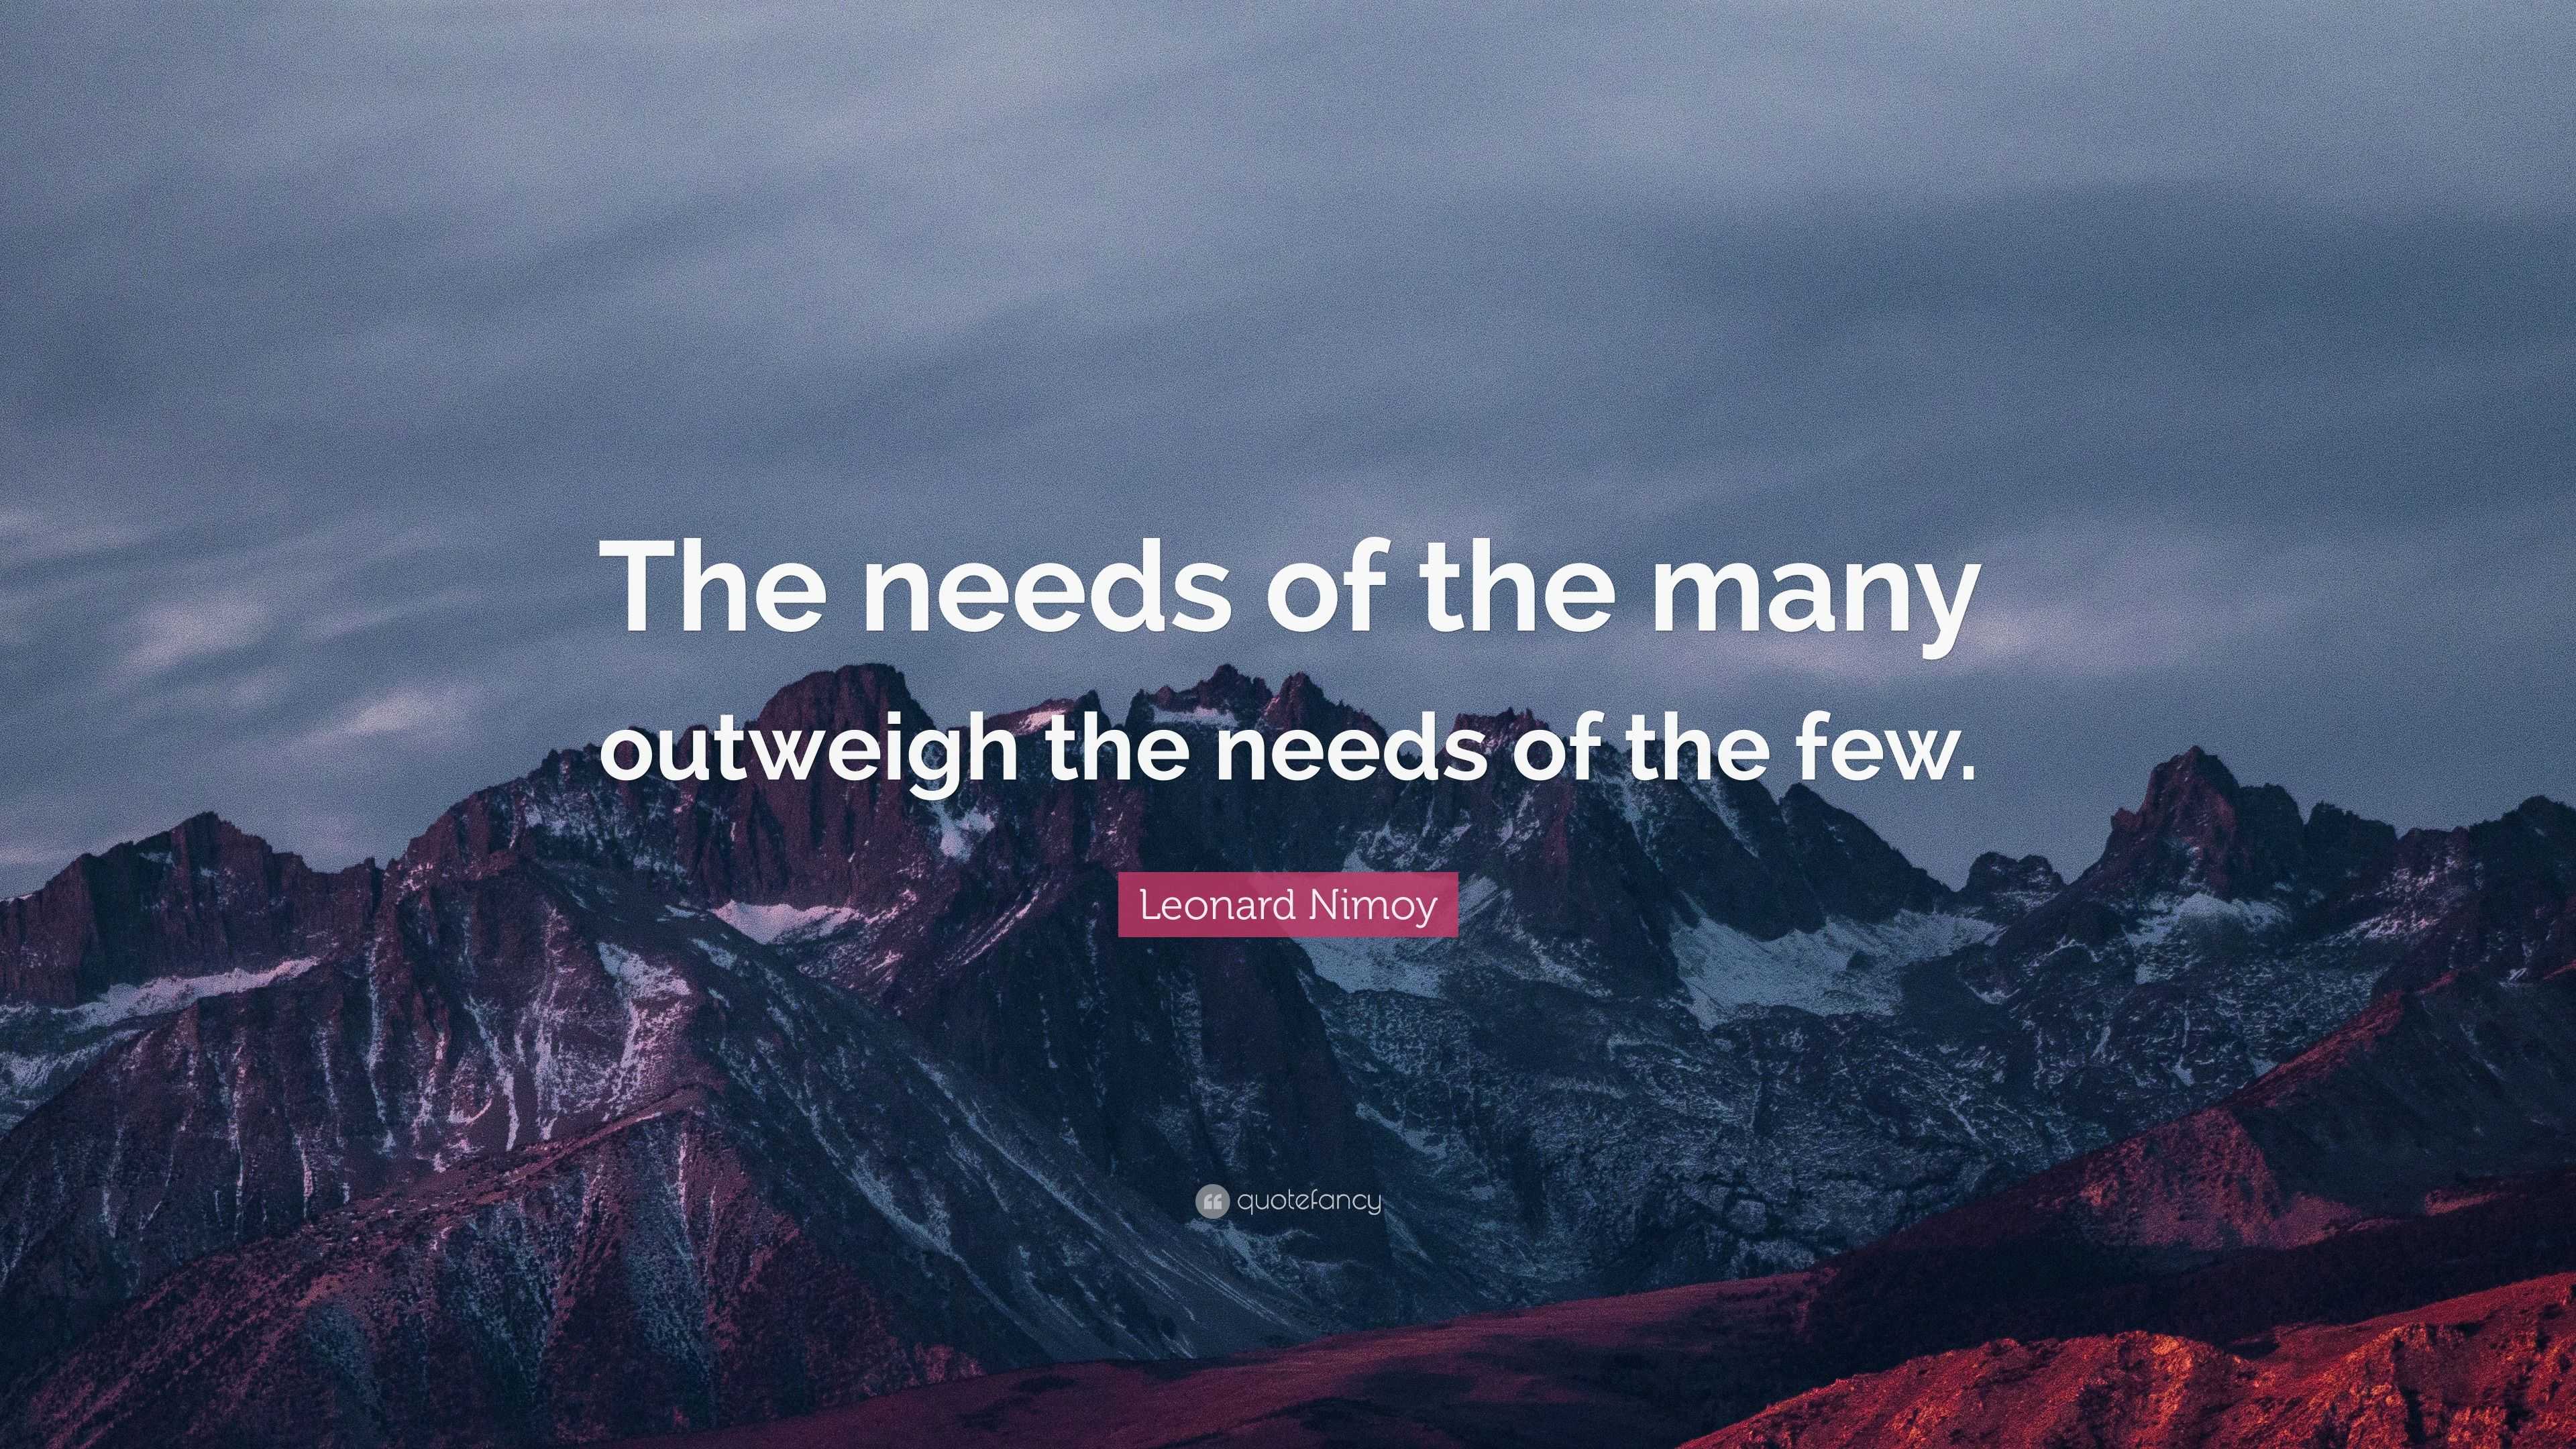 the needs of the many outweigh the needs of the few quote